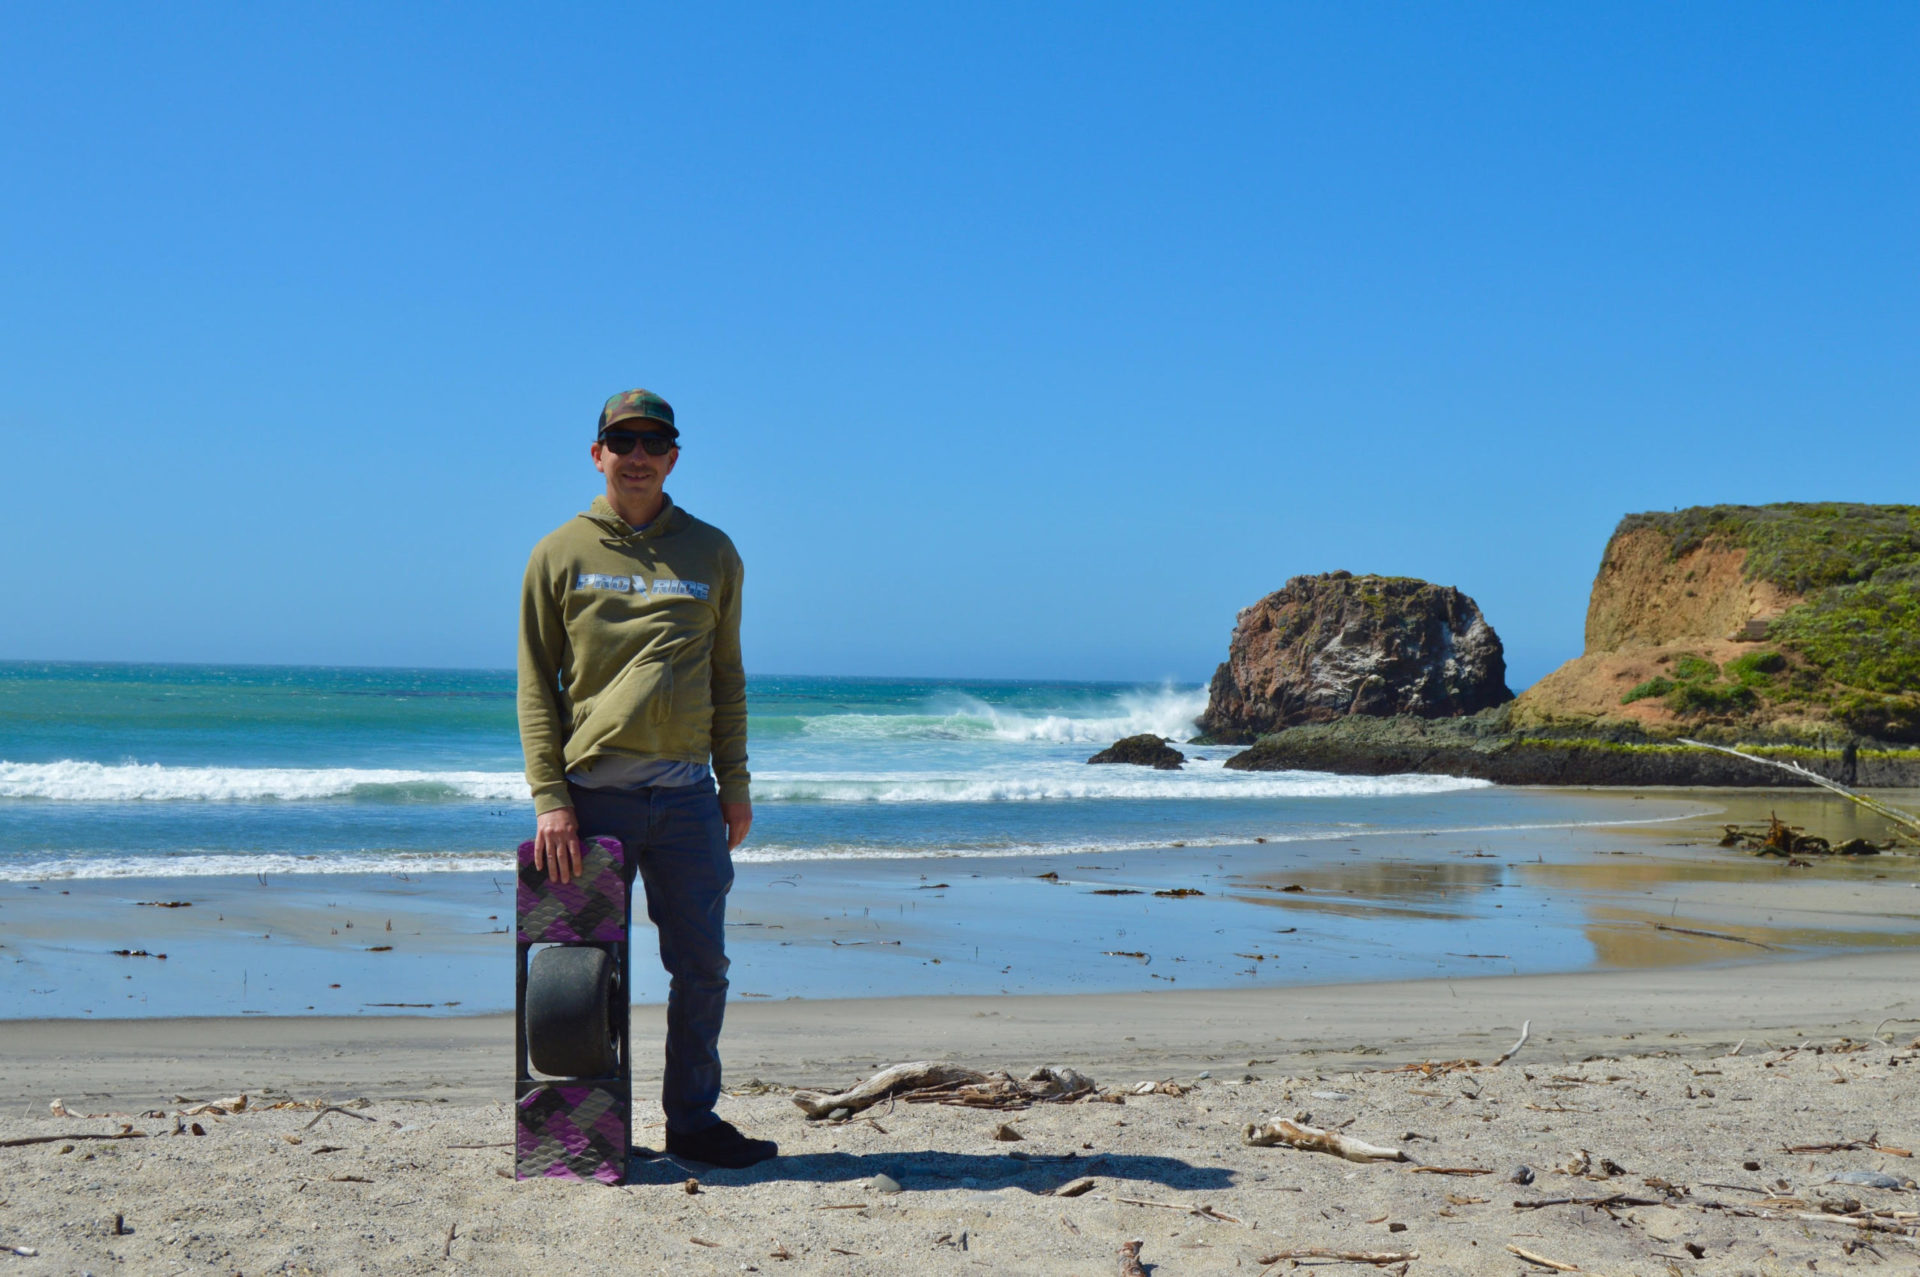 ProRide founder Paul Orehek with his Onewheel at the beach